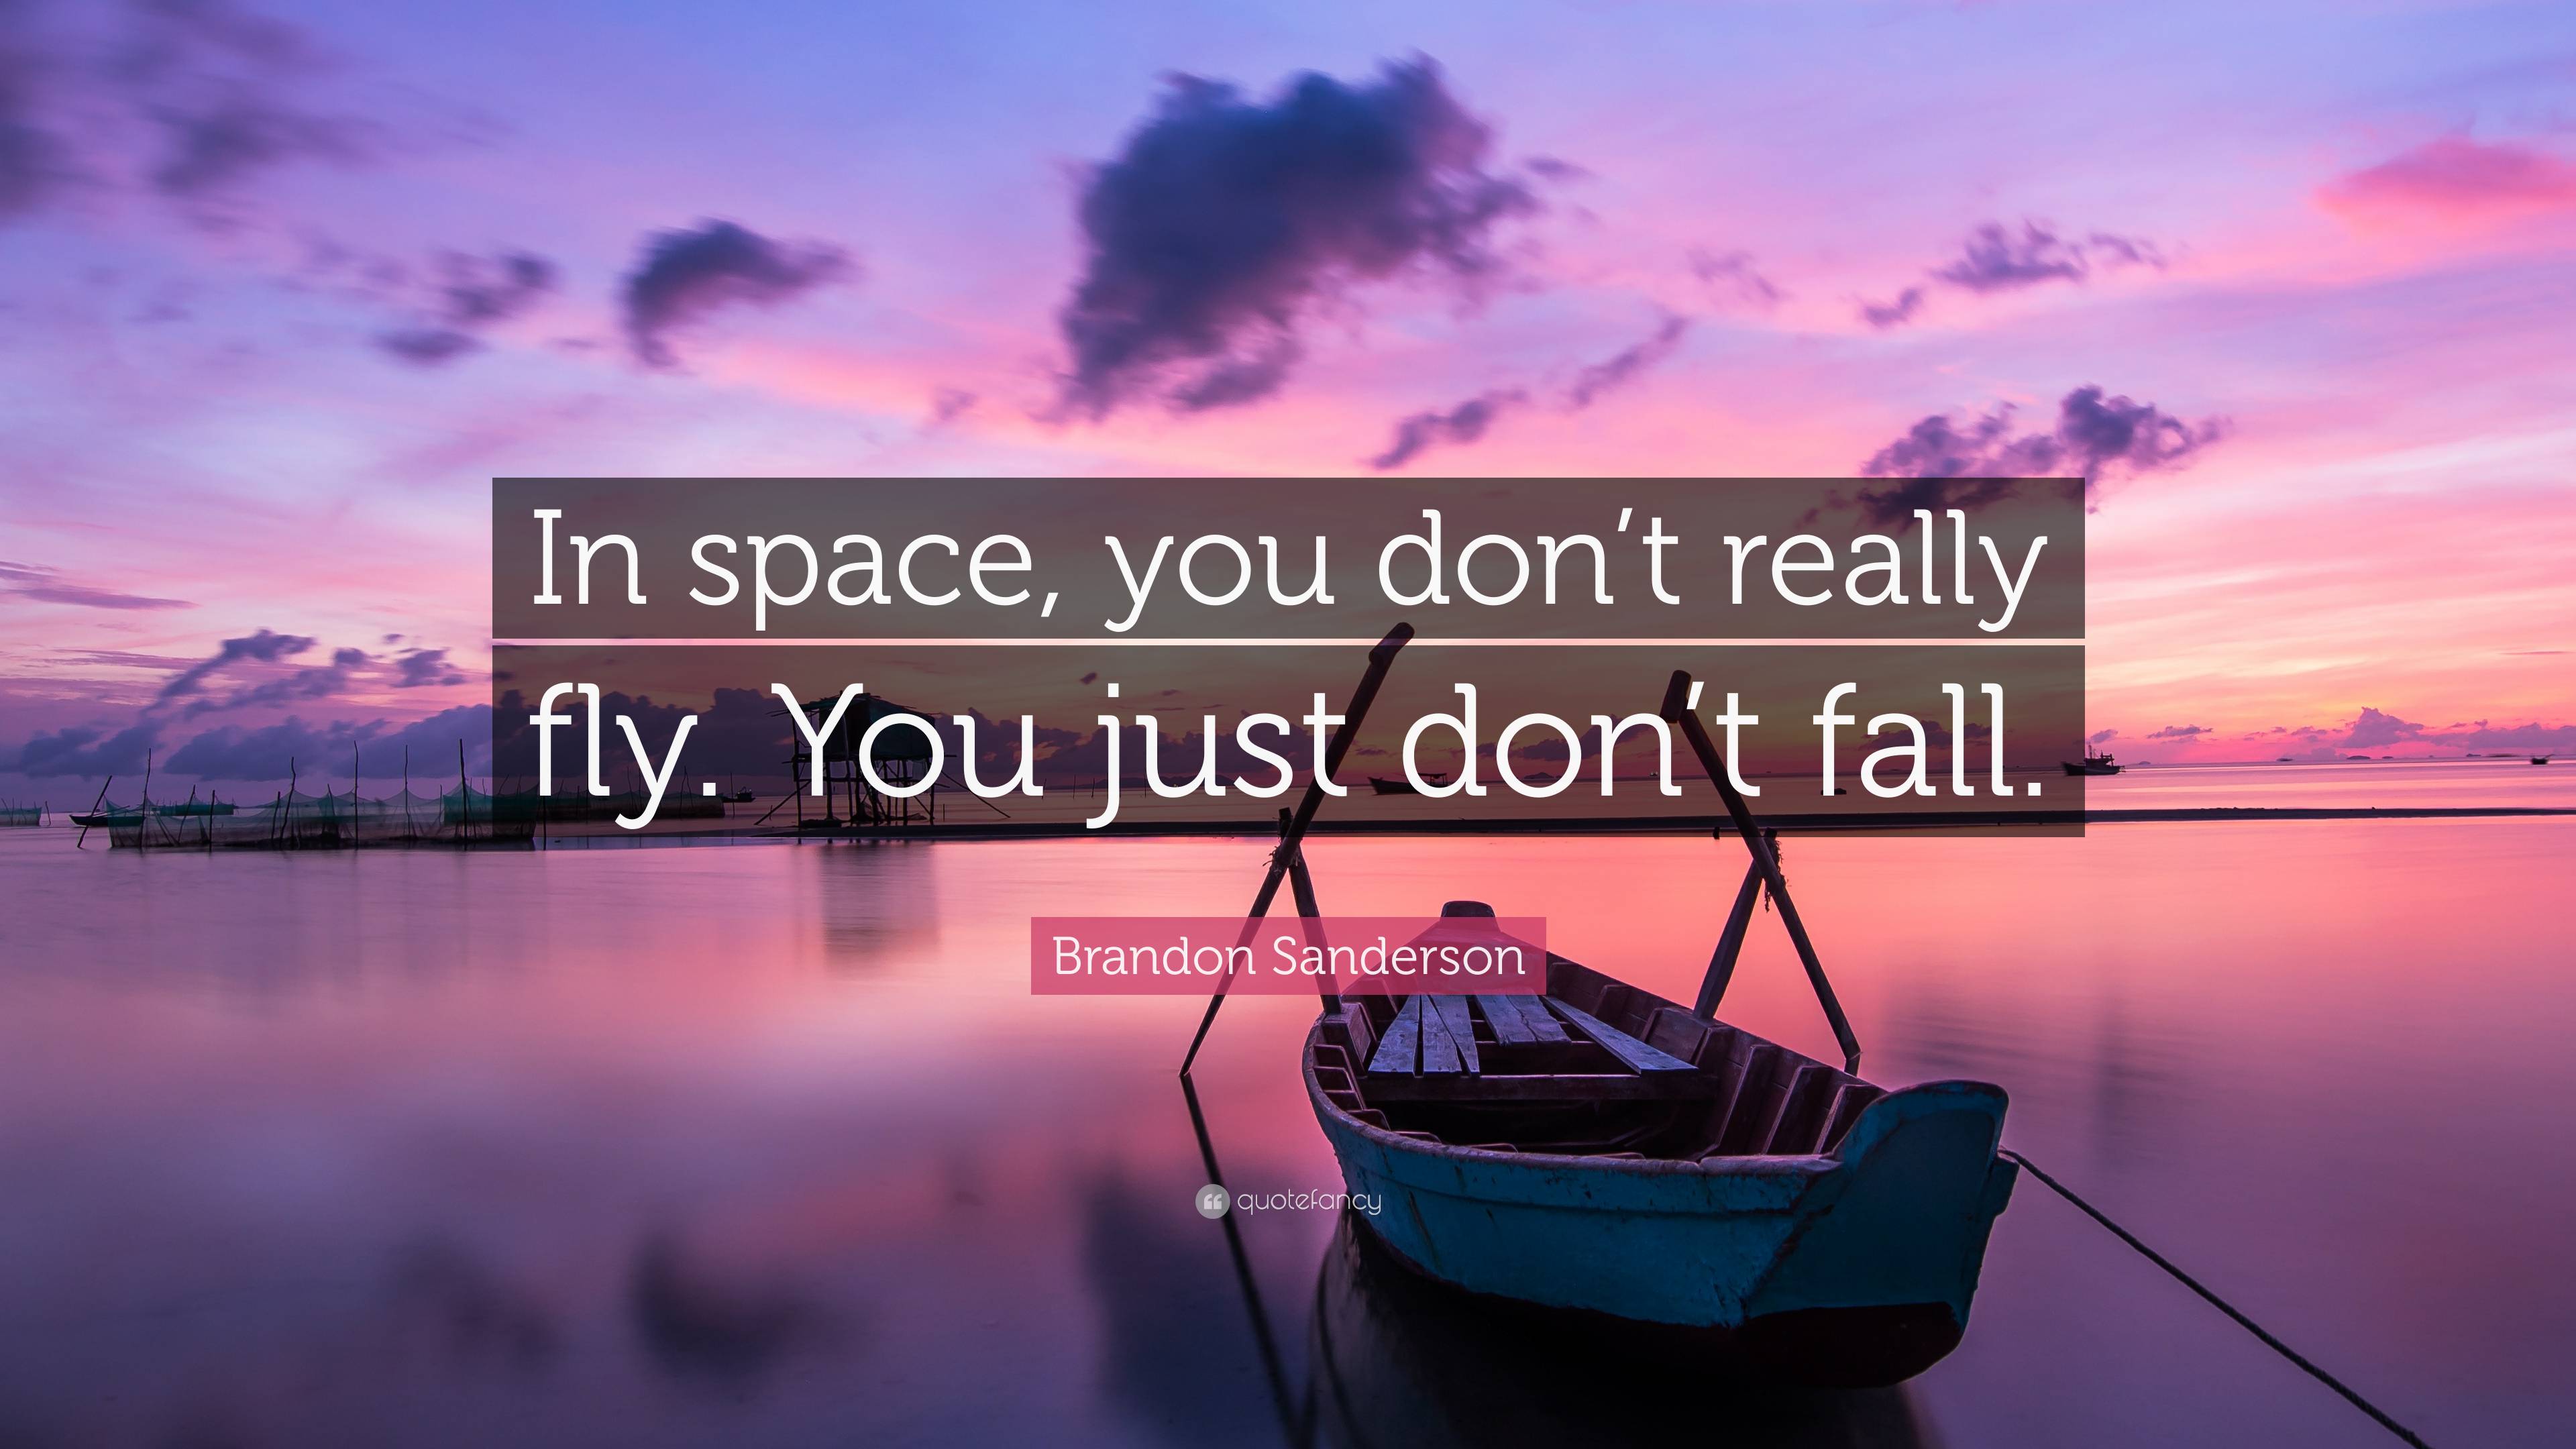 https://quotefancy.com/media/wallpaper/3840x2160/7074268-Brandon-Sanderson-Quote-In-space-you-don-t-really-fly-You-just-don.jpg